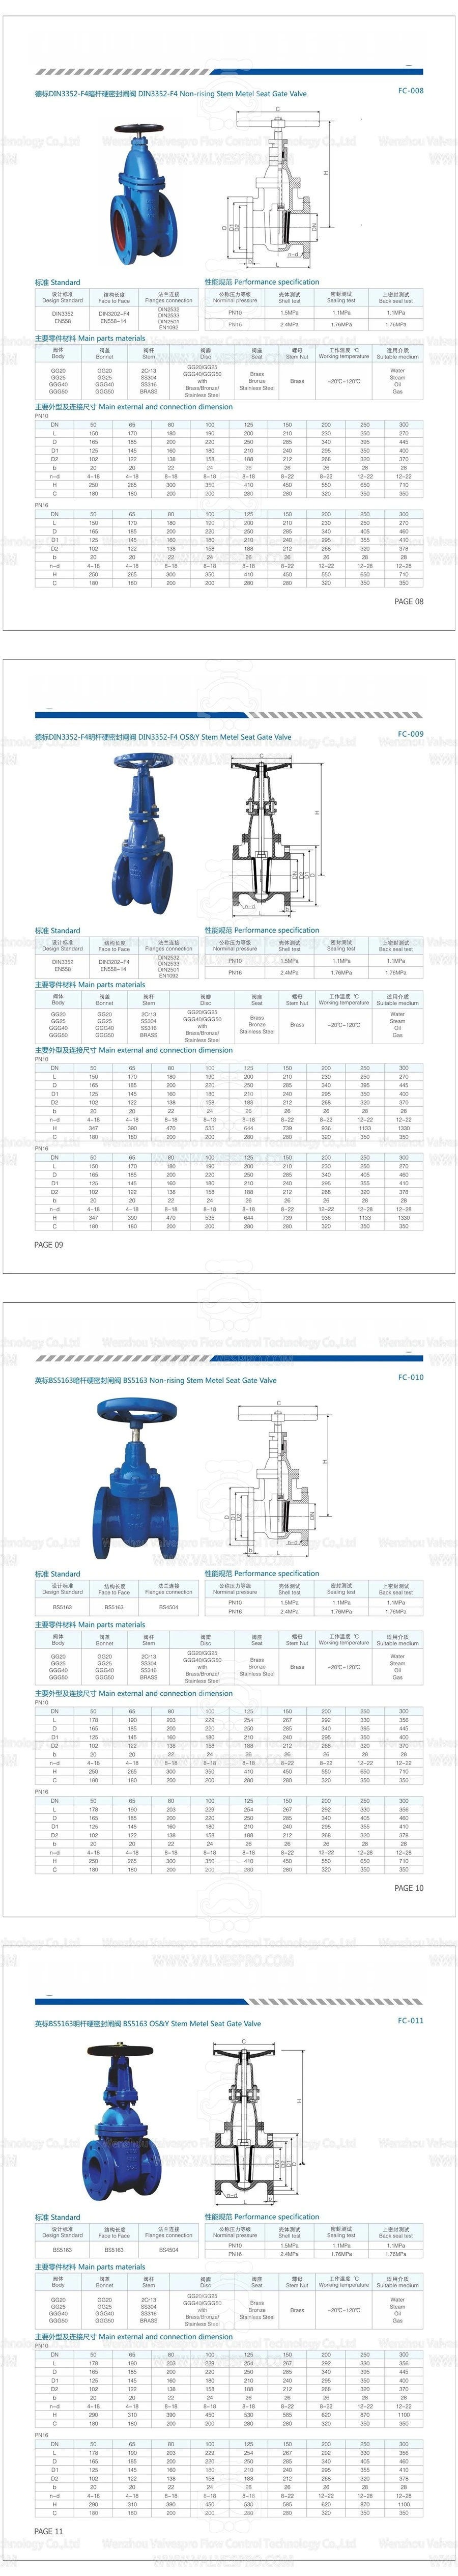 DIN3352-F6 Ductile Iron Cast Iron Flanged Swing Check Valve